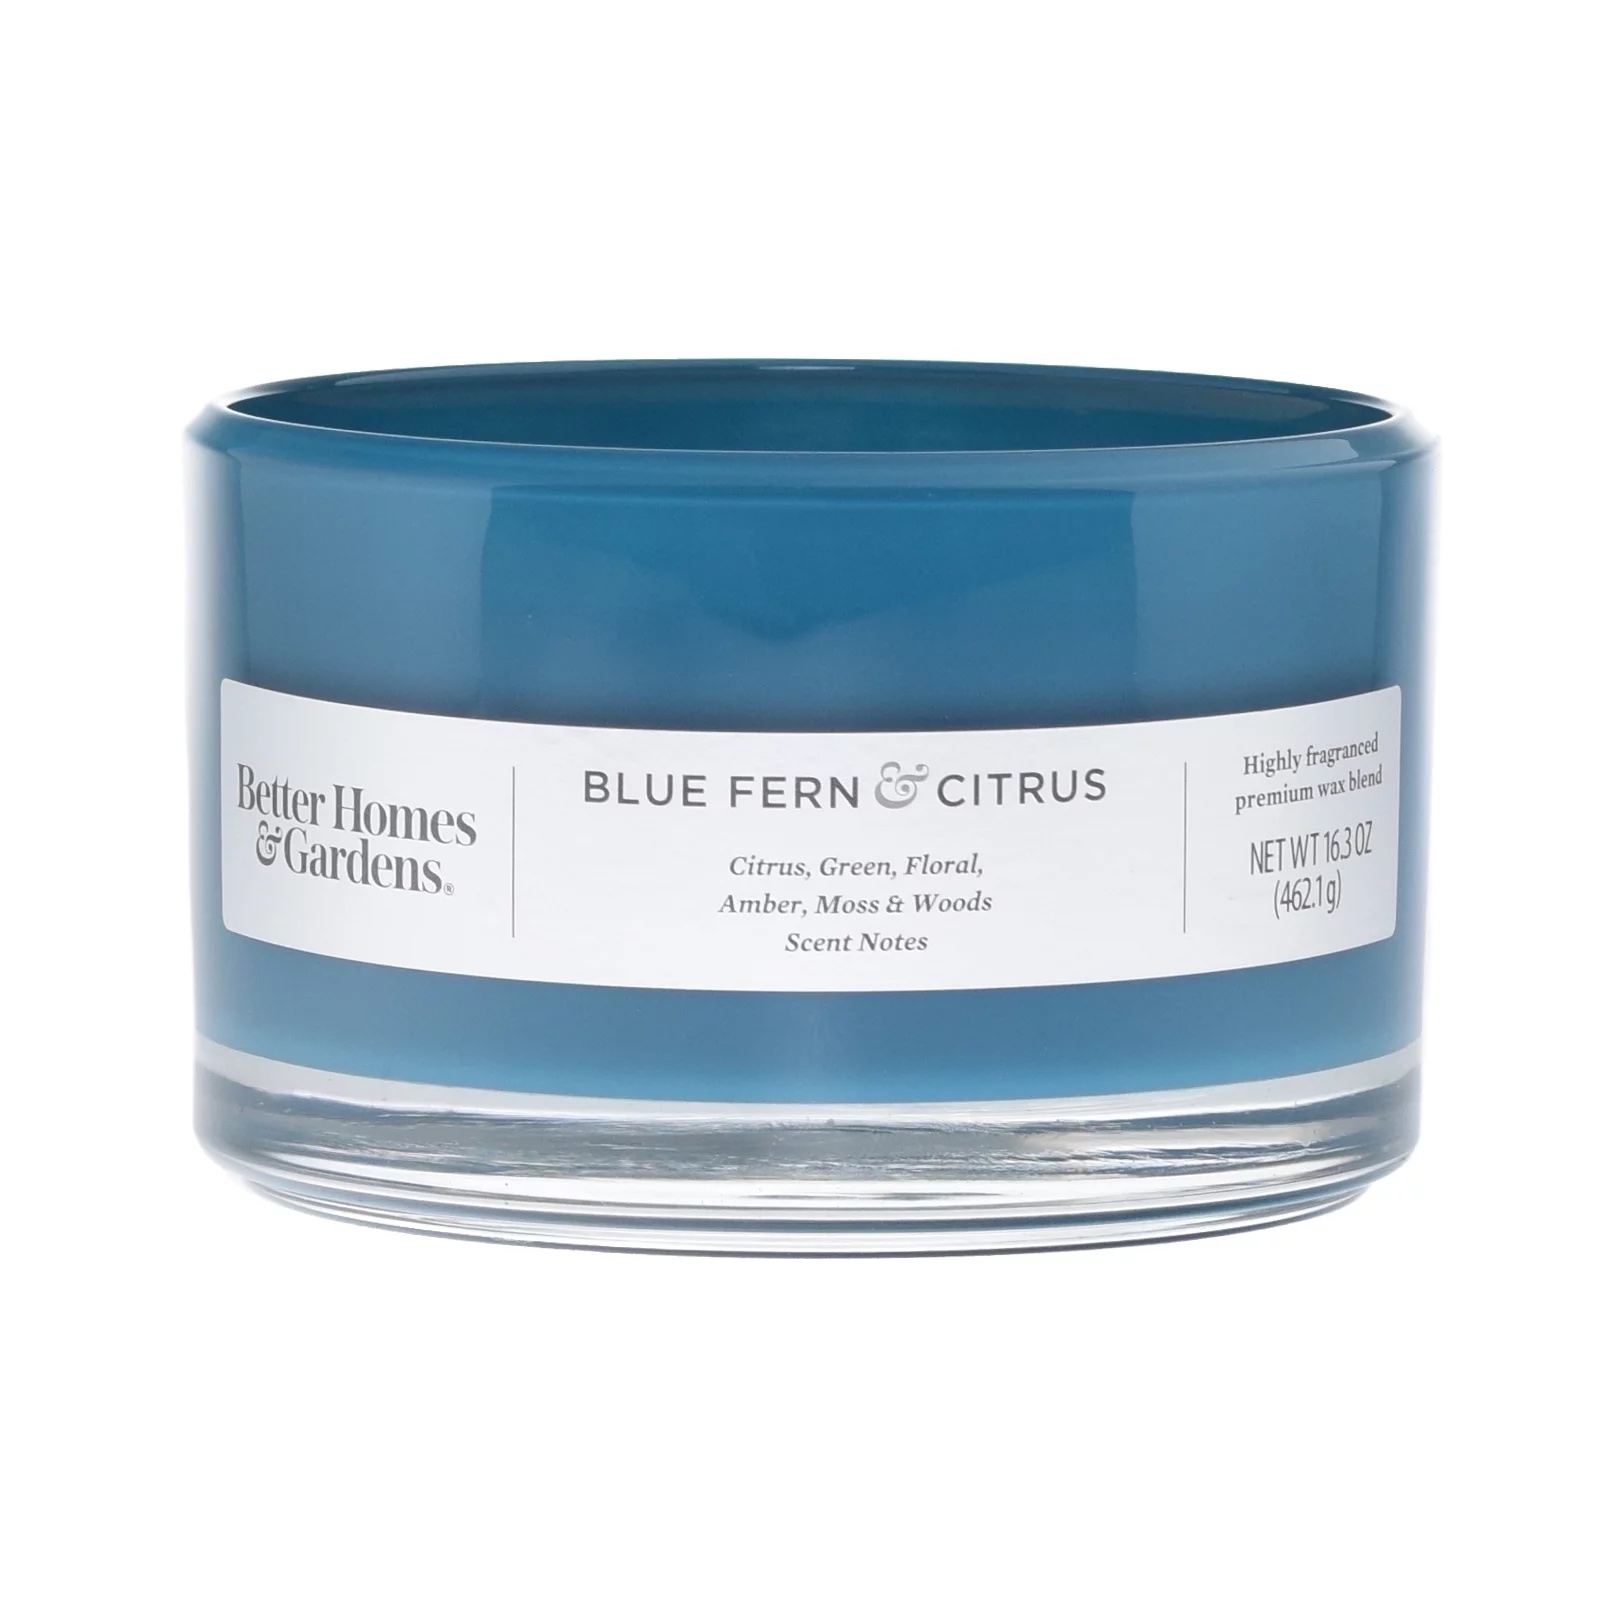 blue fern and citrus candle